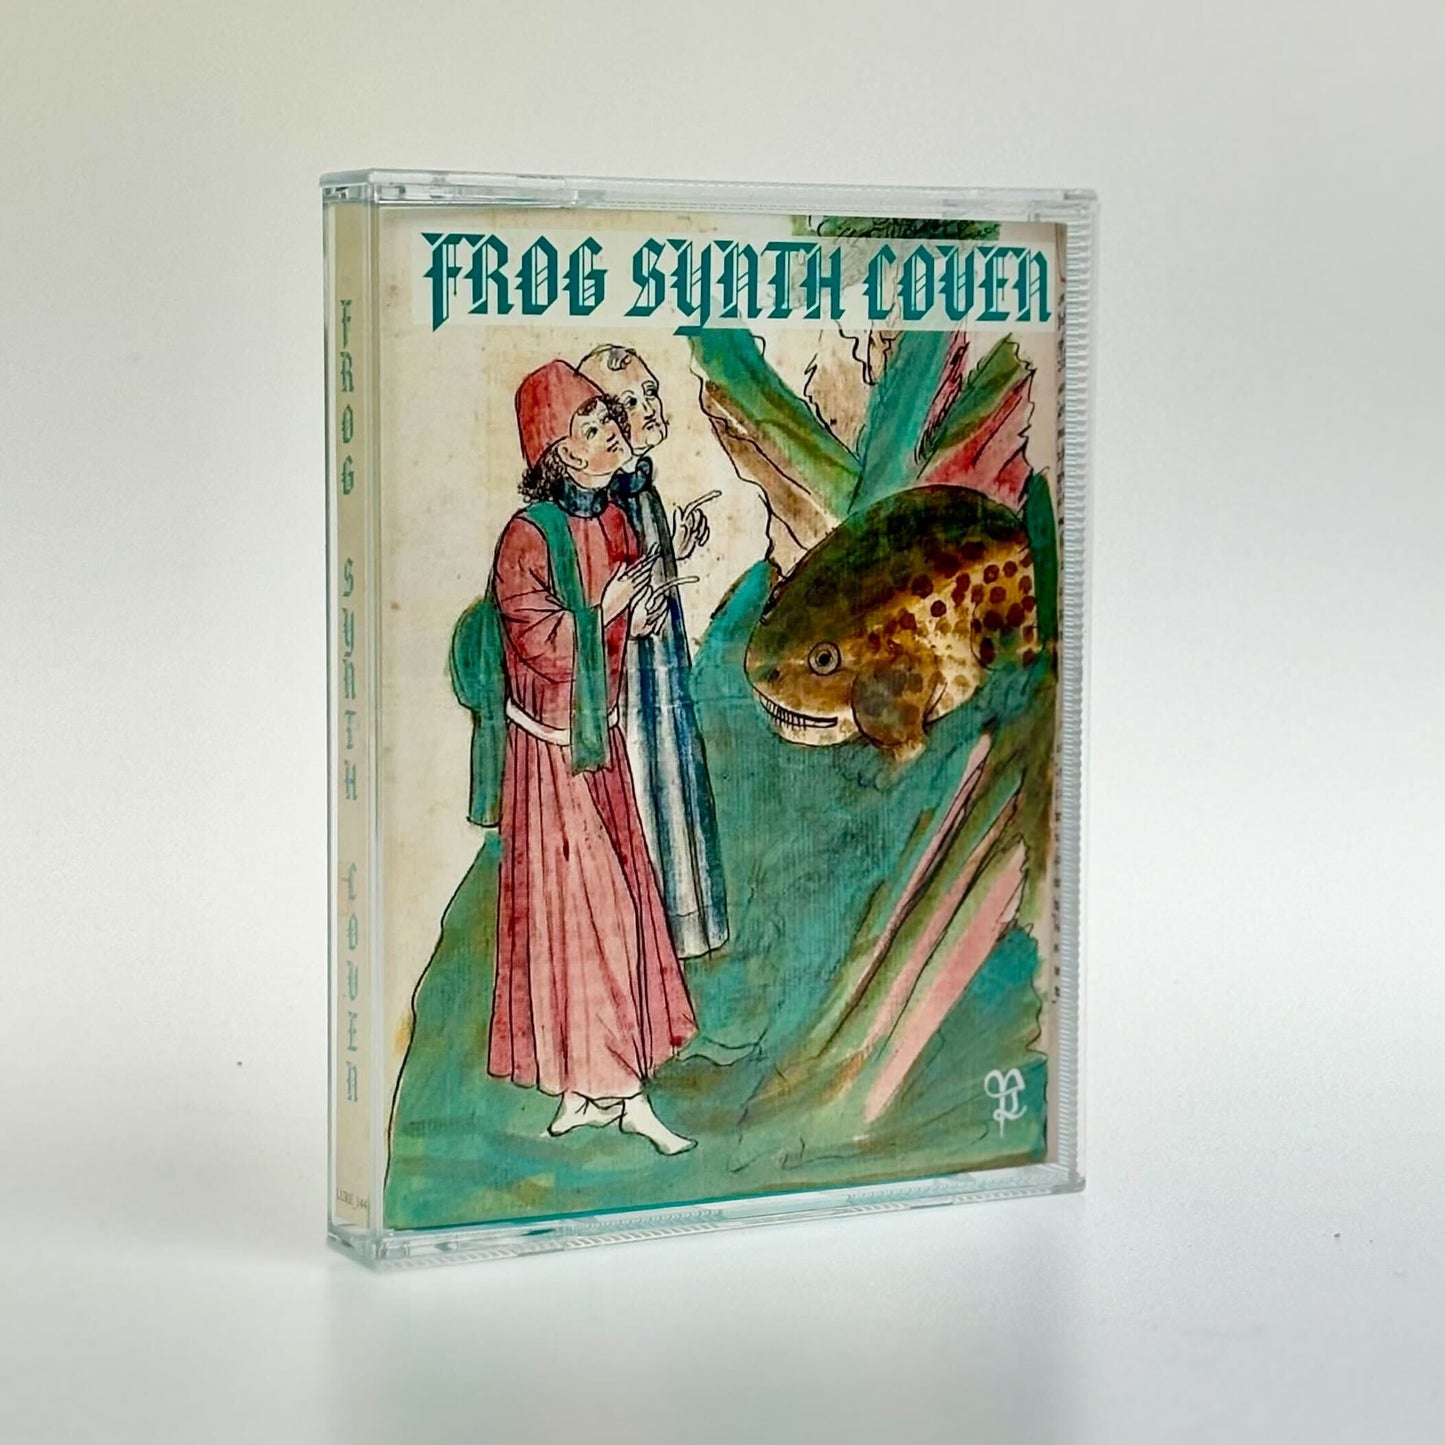 FROG SYNTH COVEN - double cassette